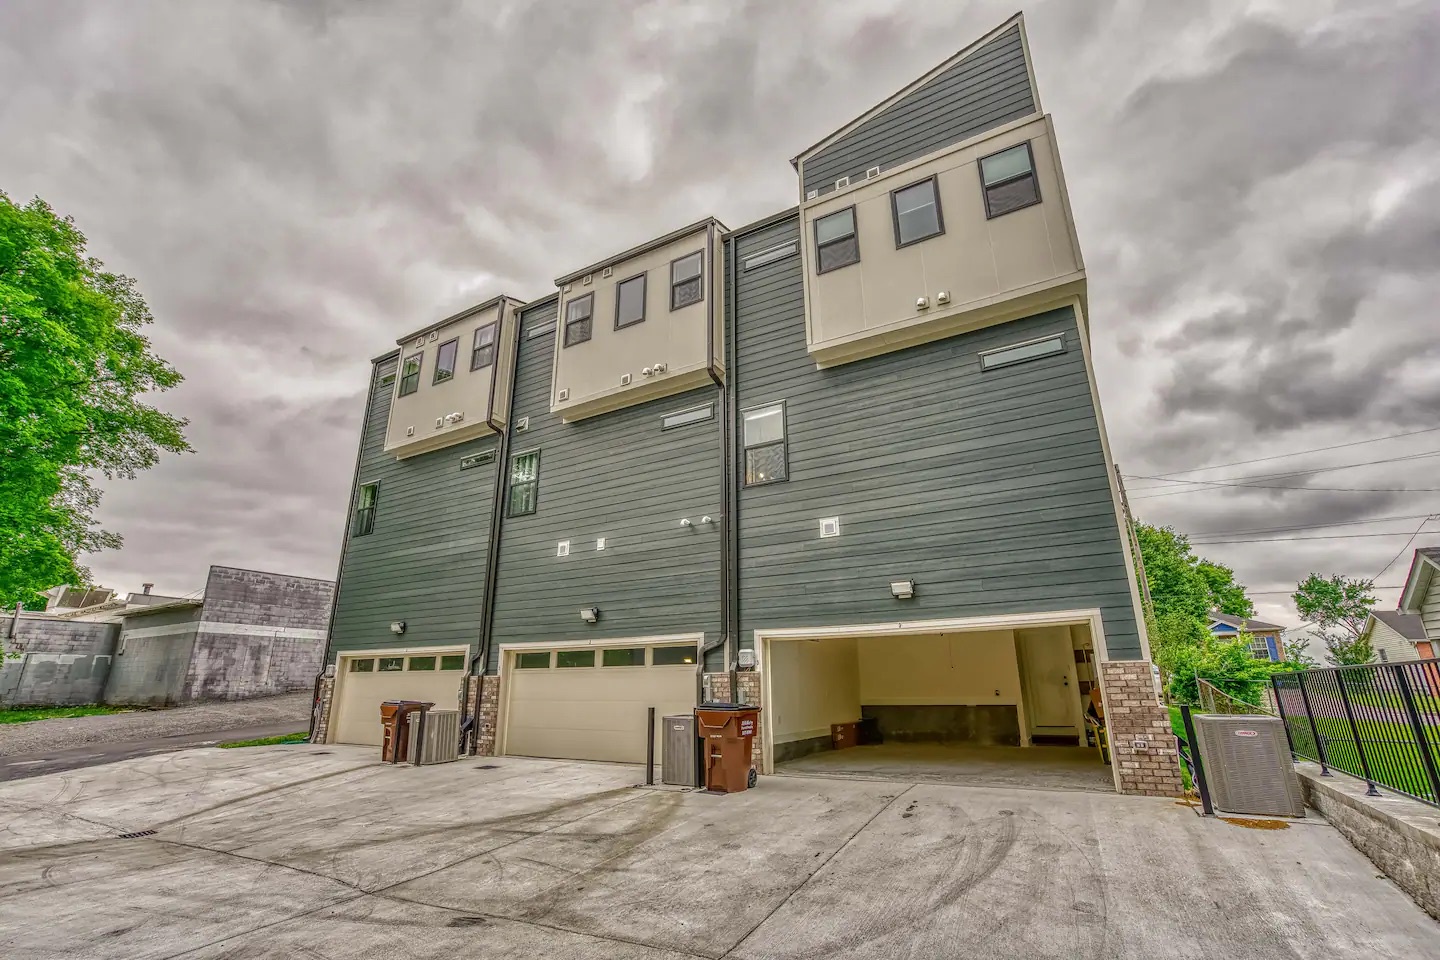 This exceptional townhome offers garage parking for 2 compact vehicles